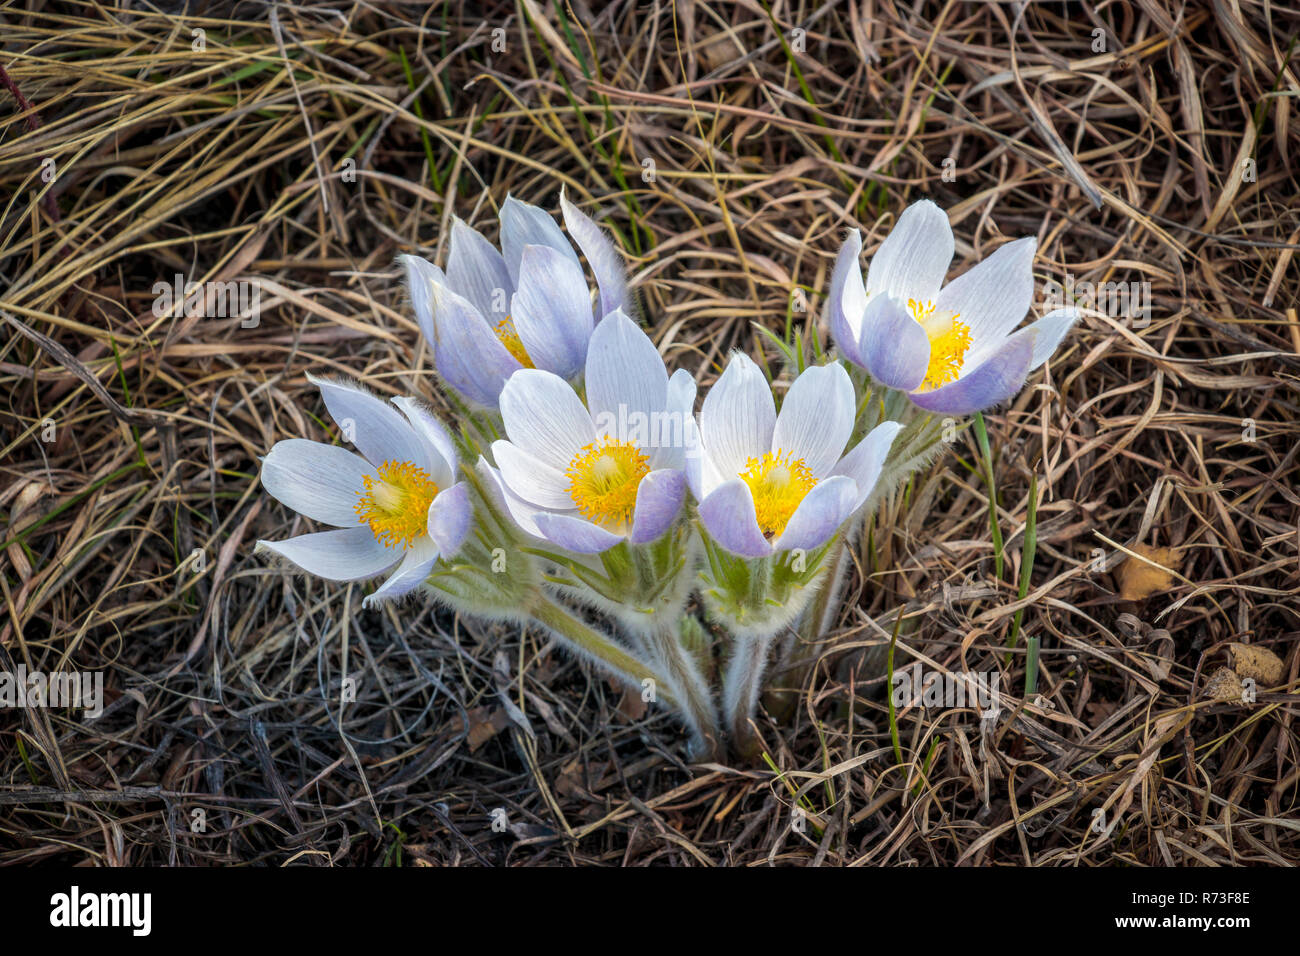 The Prairie crocus, (Anemone patens) blooming in an area of uncultivated grassland near Plum Coulee, Manitoba, Canada. Stock Photo